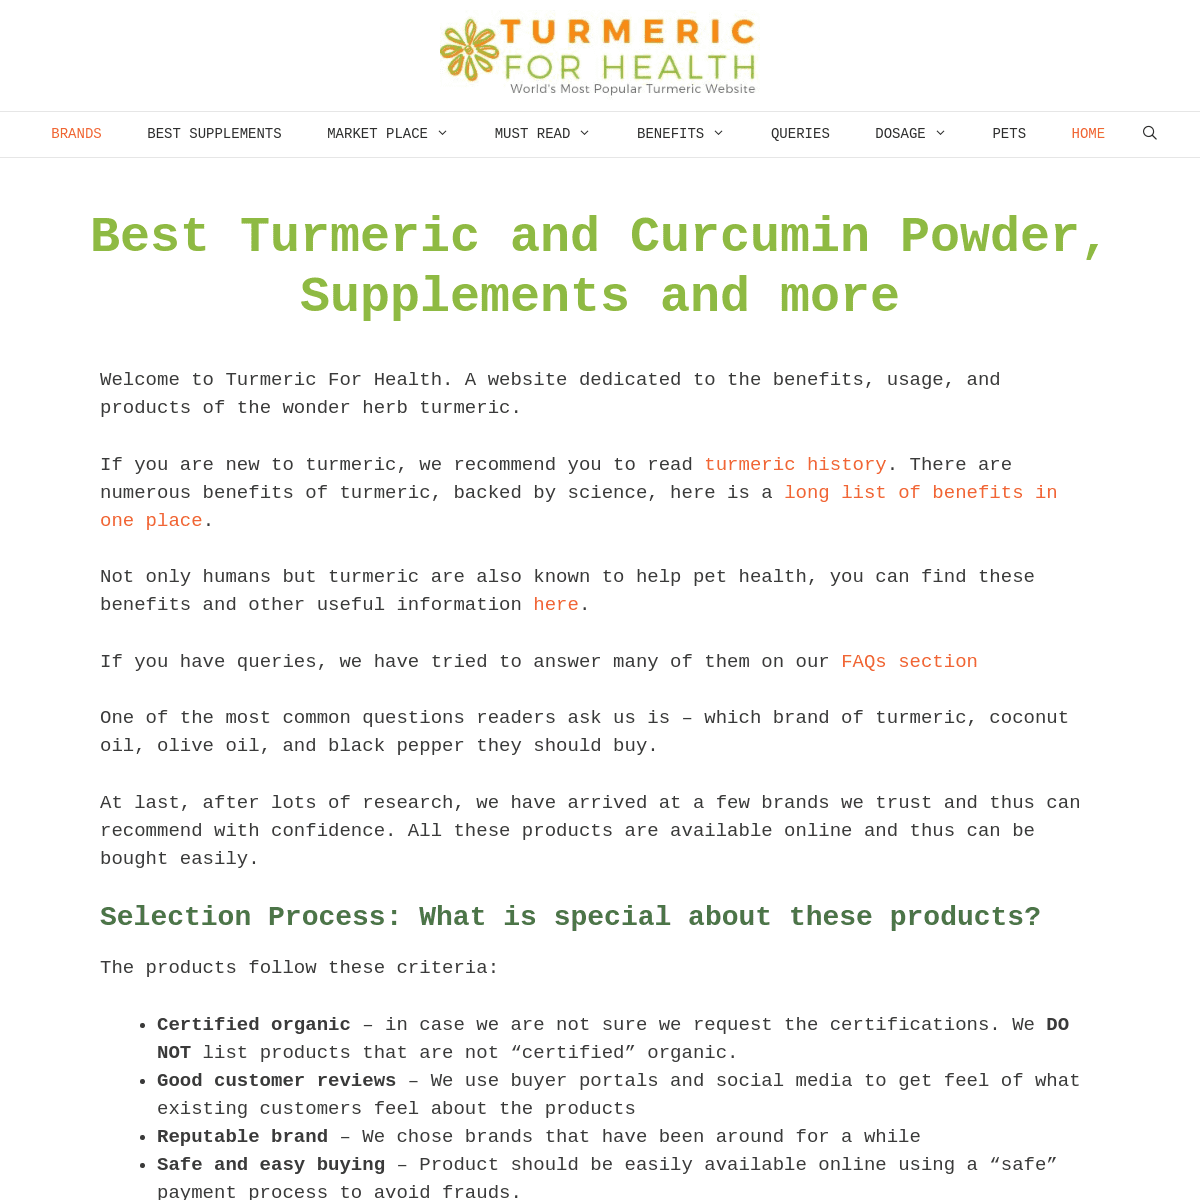 A complete backup of https://turmericforhealth.com